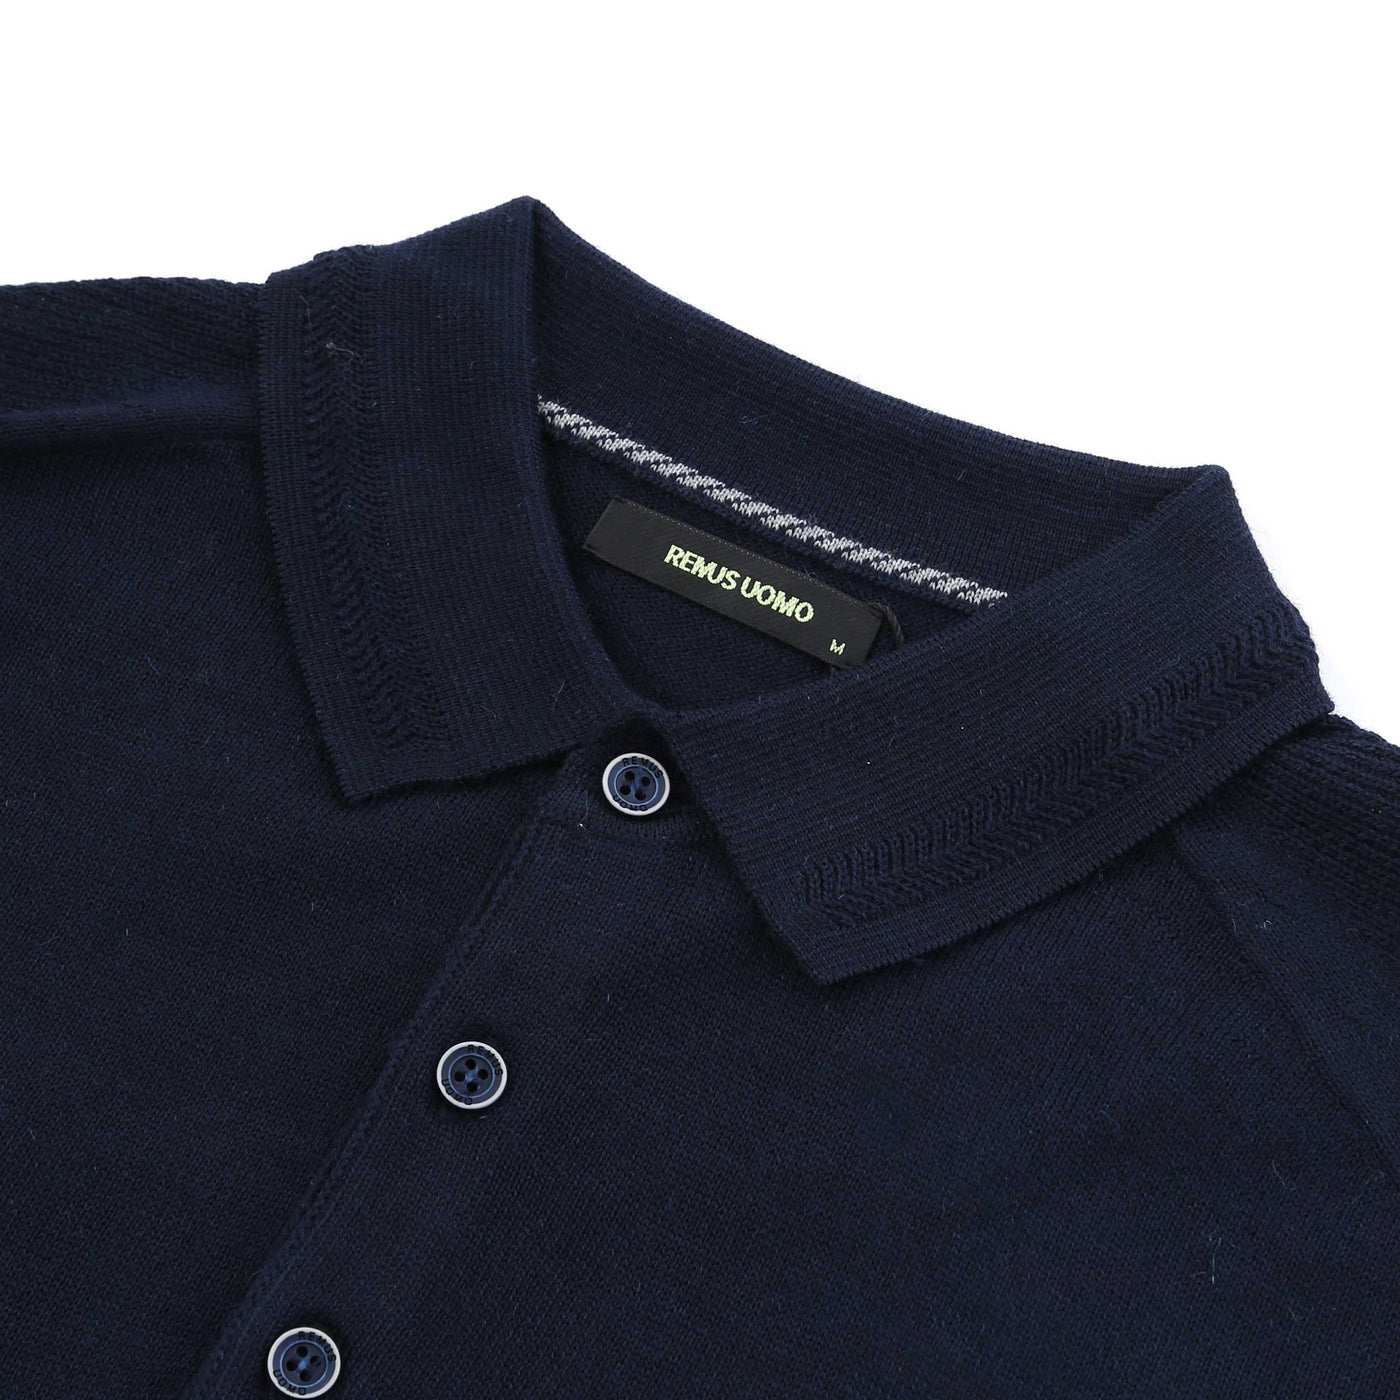 Remus Uomo 3 Button Knitted Polo Shirt in Navy Collar